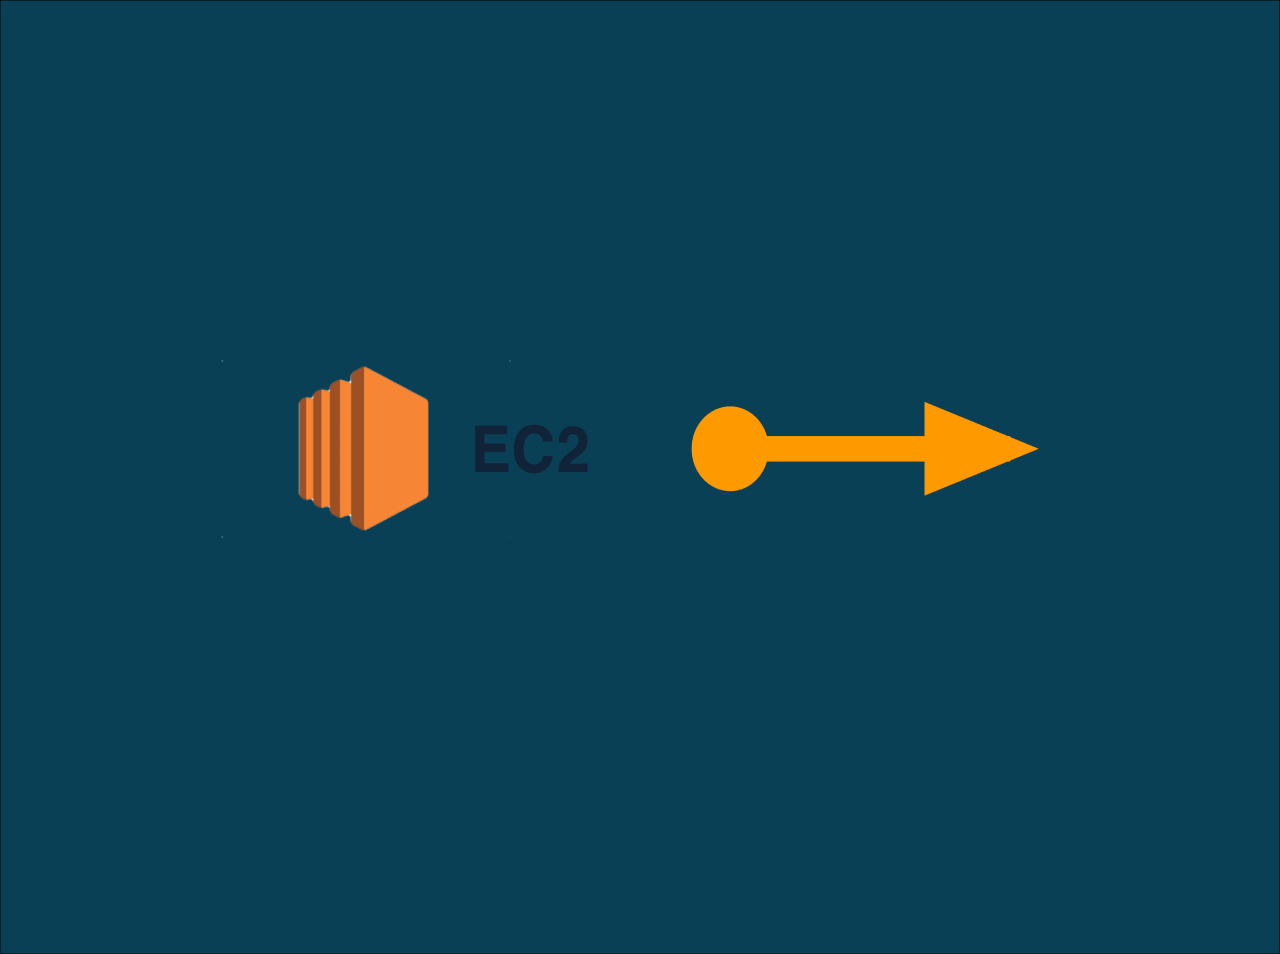 How to assign an Elastic IP to EC2 instance